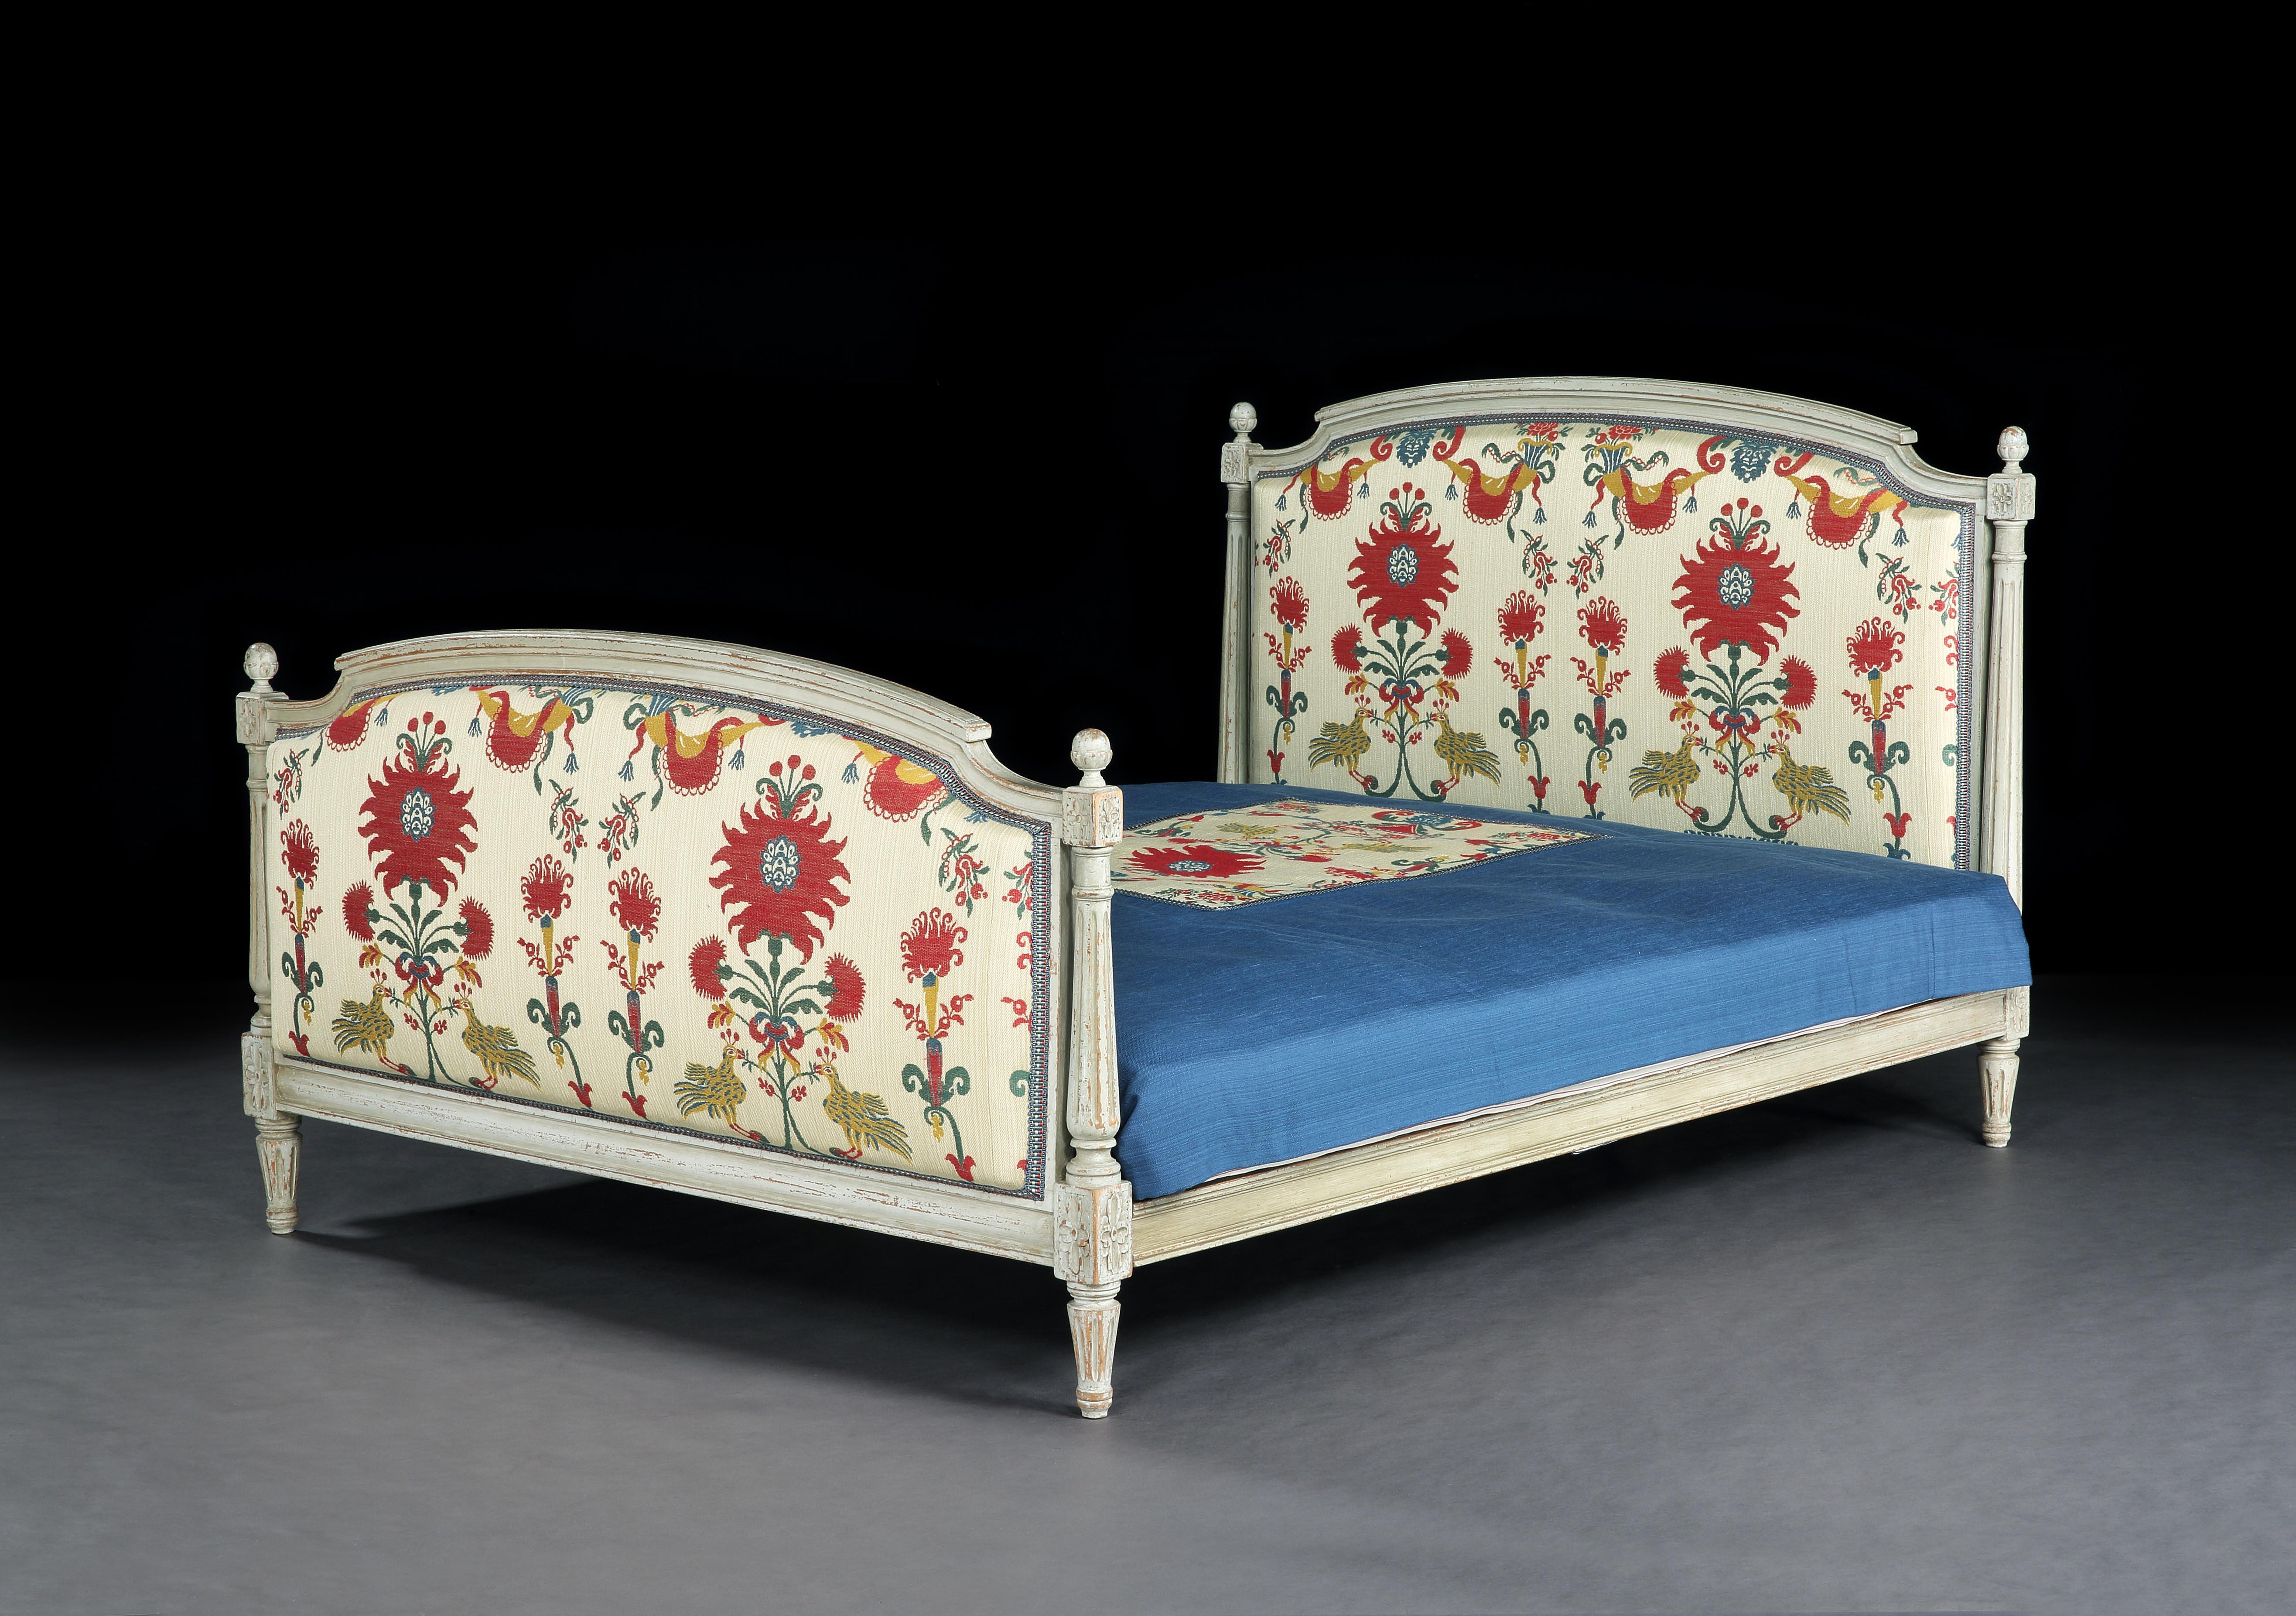 Louis XVI, carved & painted, double bed upholstered with susani, woven textile with flowers & lovebirds & custom made bedspread, sold with custom made box spring mattress base and king-sized sprung mattress 150cm, 5ft Wide

- The headboard and